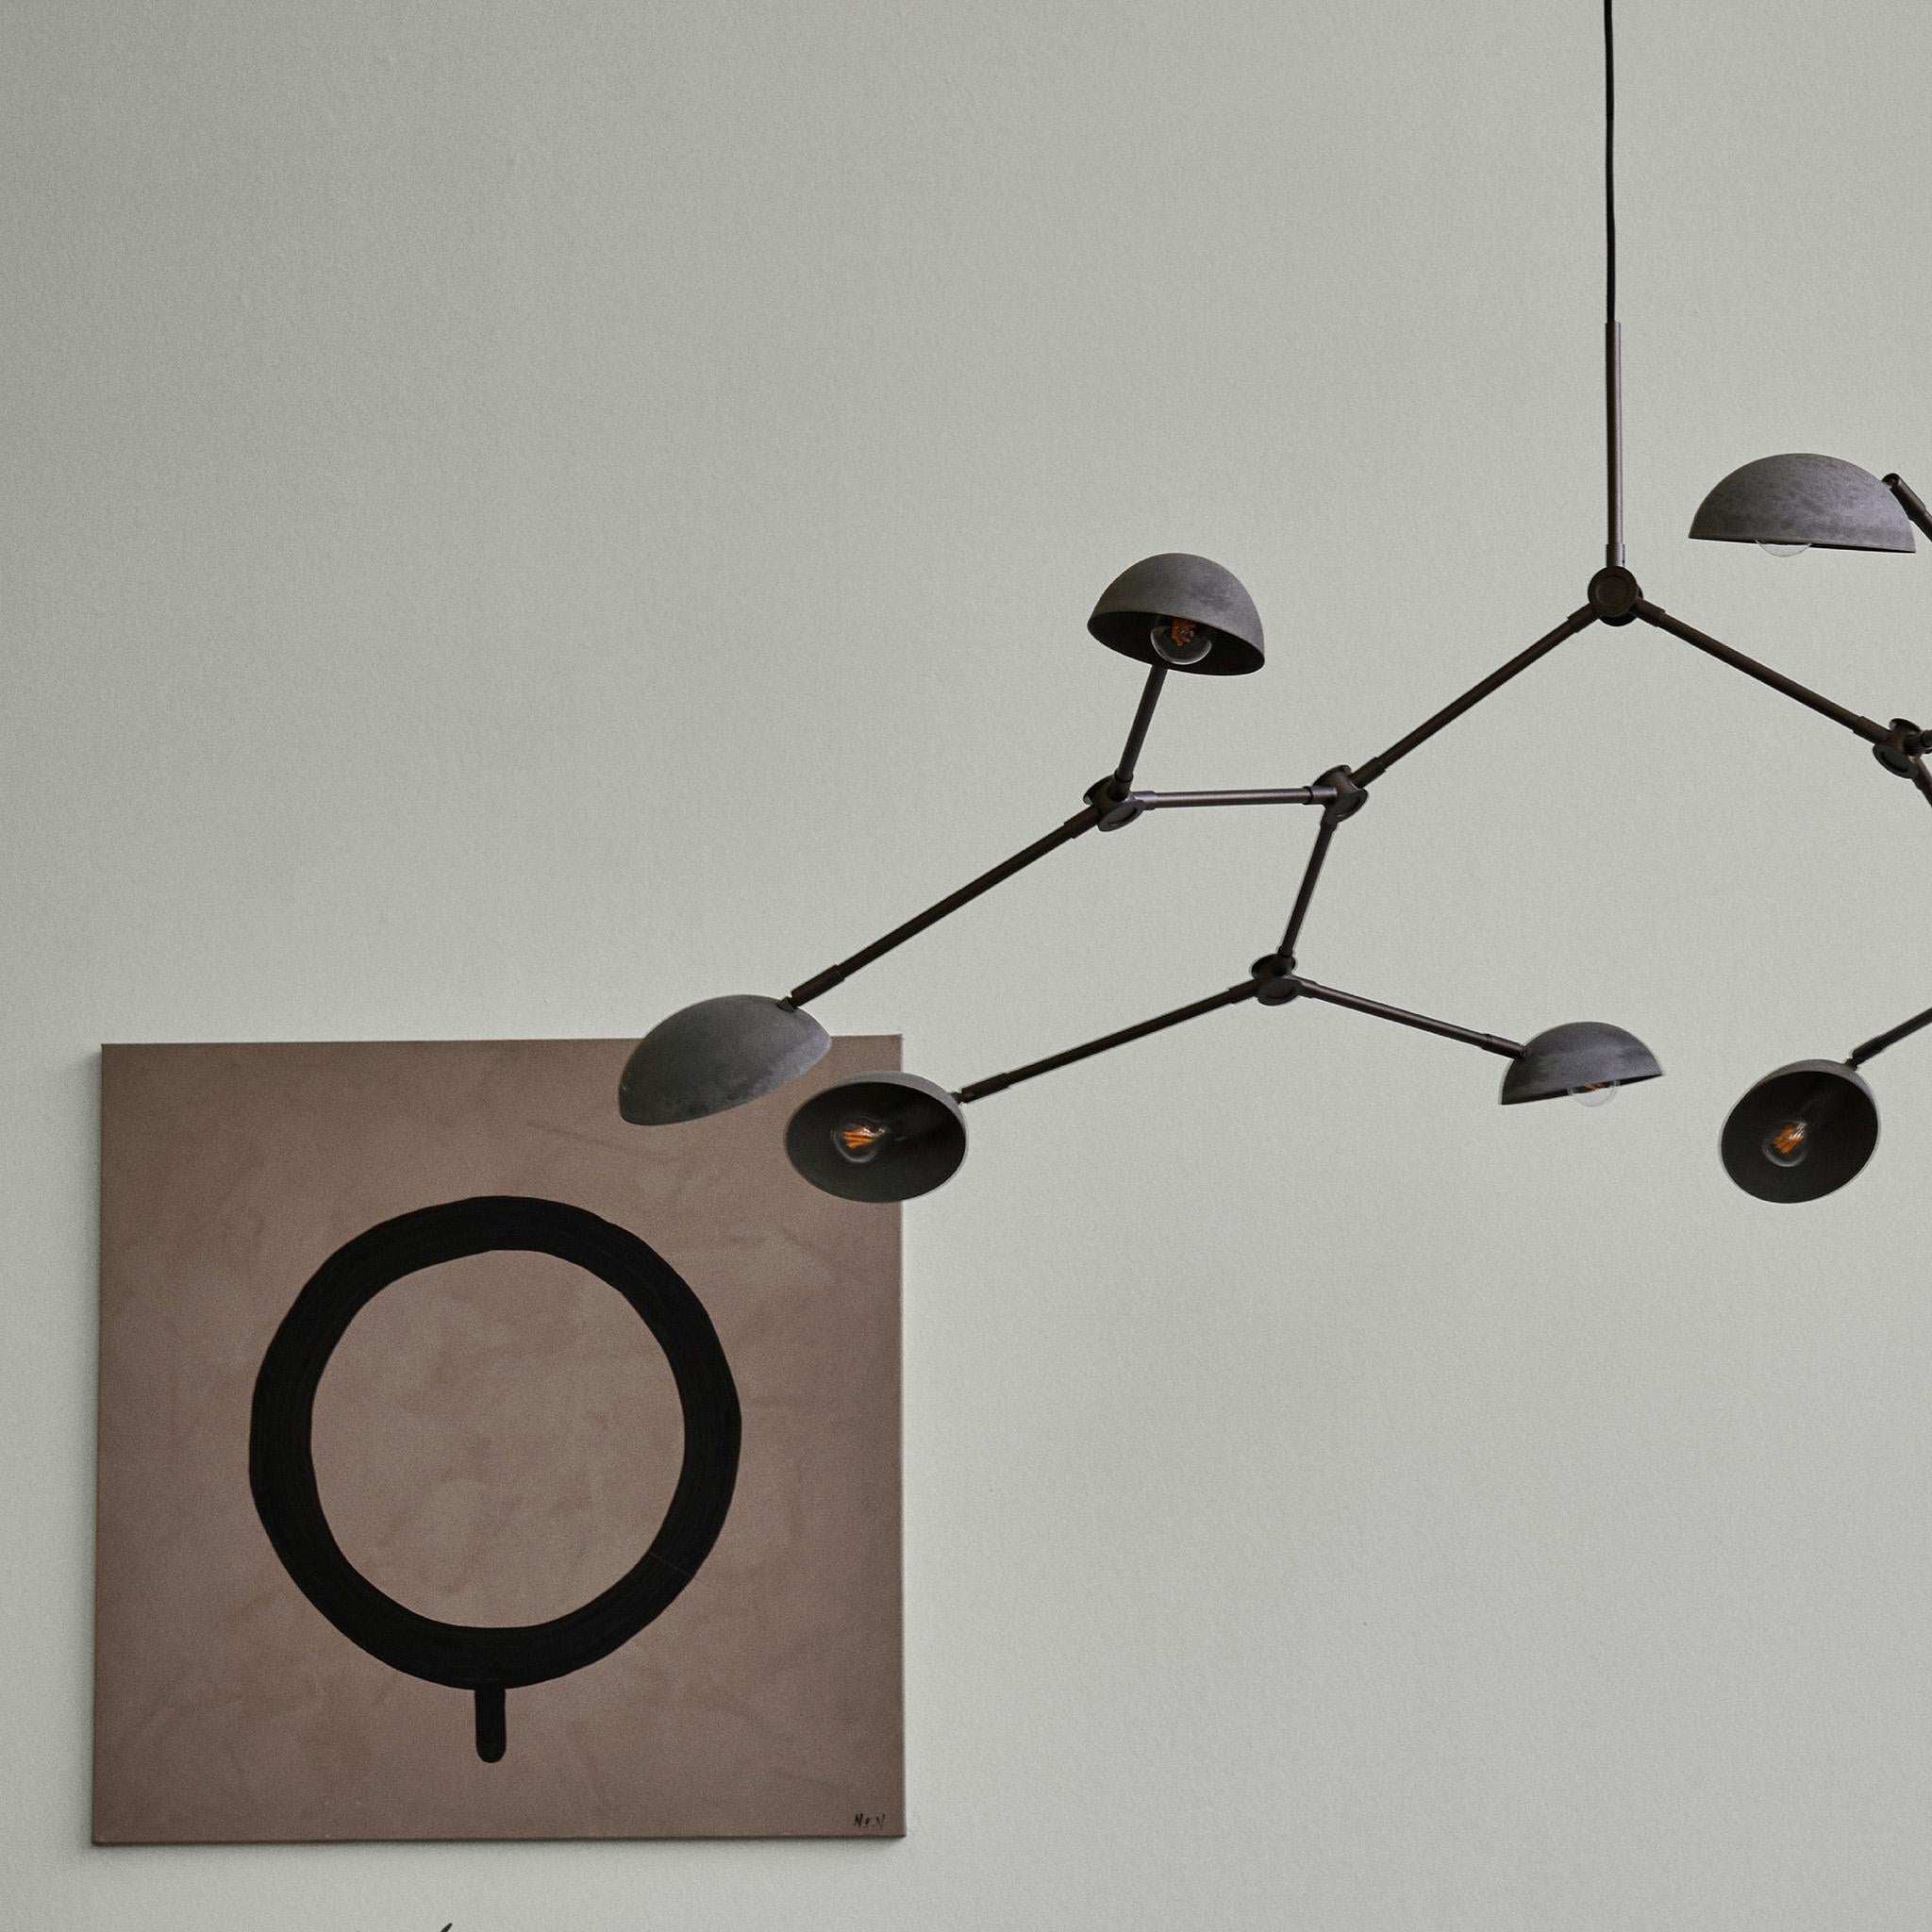 Drop chandelier bronze by 101 Copenhagen
Designed by Kristian Sofus Hansen & Tommy Hyldahl.
Dimensions: L155 x W91 x H21 cm
Materials: bronze; lampshade & ceiling cup:100% Iron, with plated Bronze finish
Pipes & attachment parts is made of 100% Iron